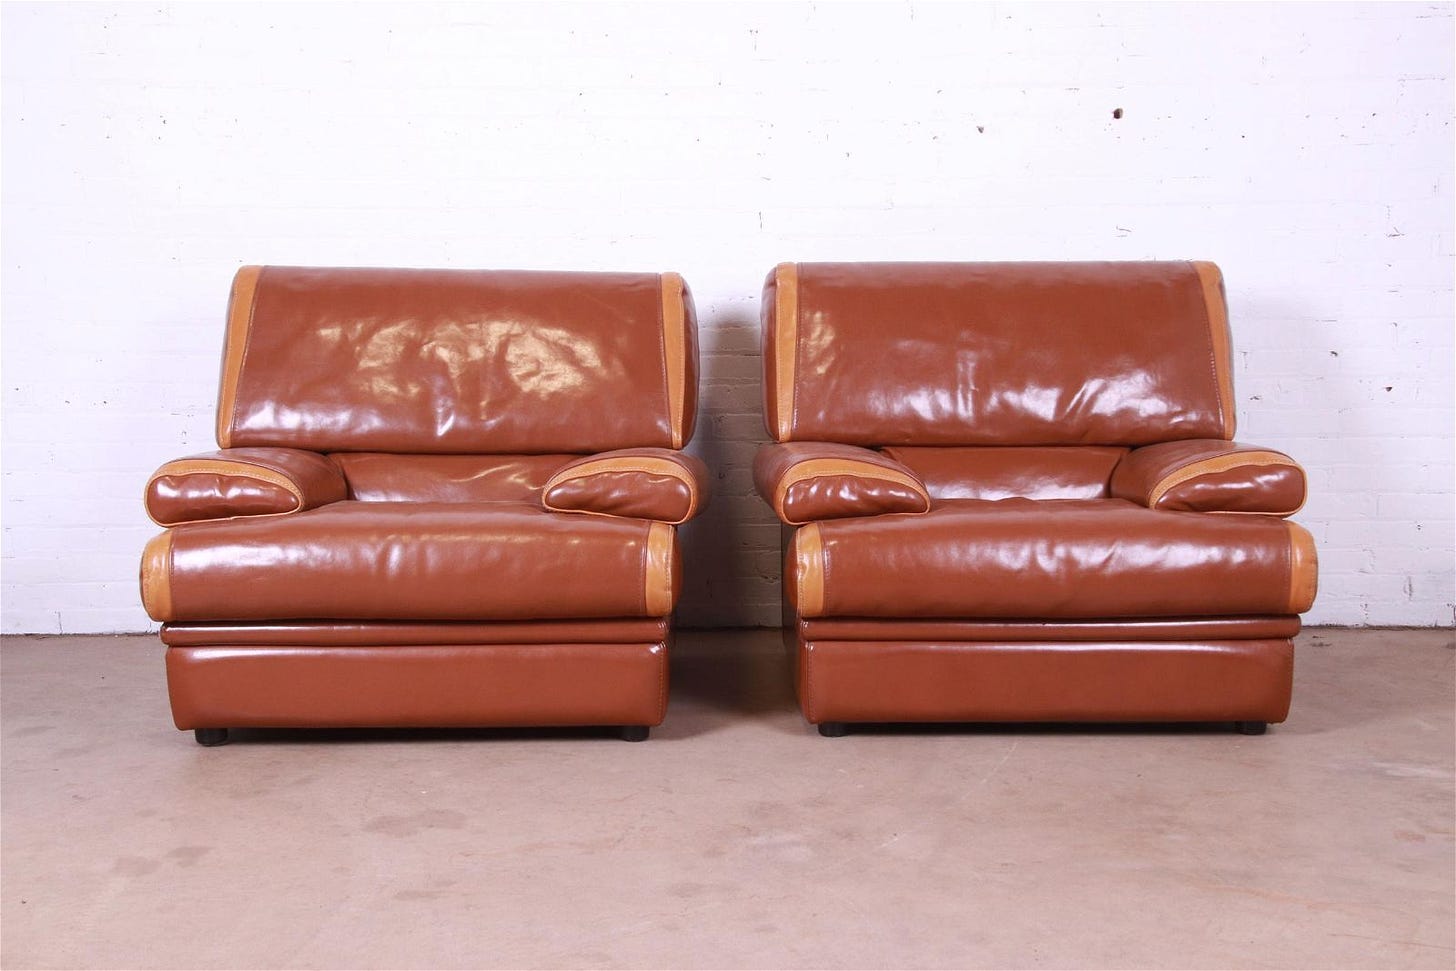 Pierre Cardin French Art Deco Oversized Leather Lounge Chairs Pair